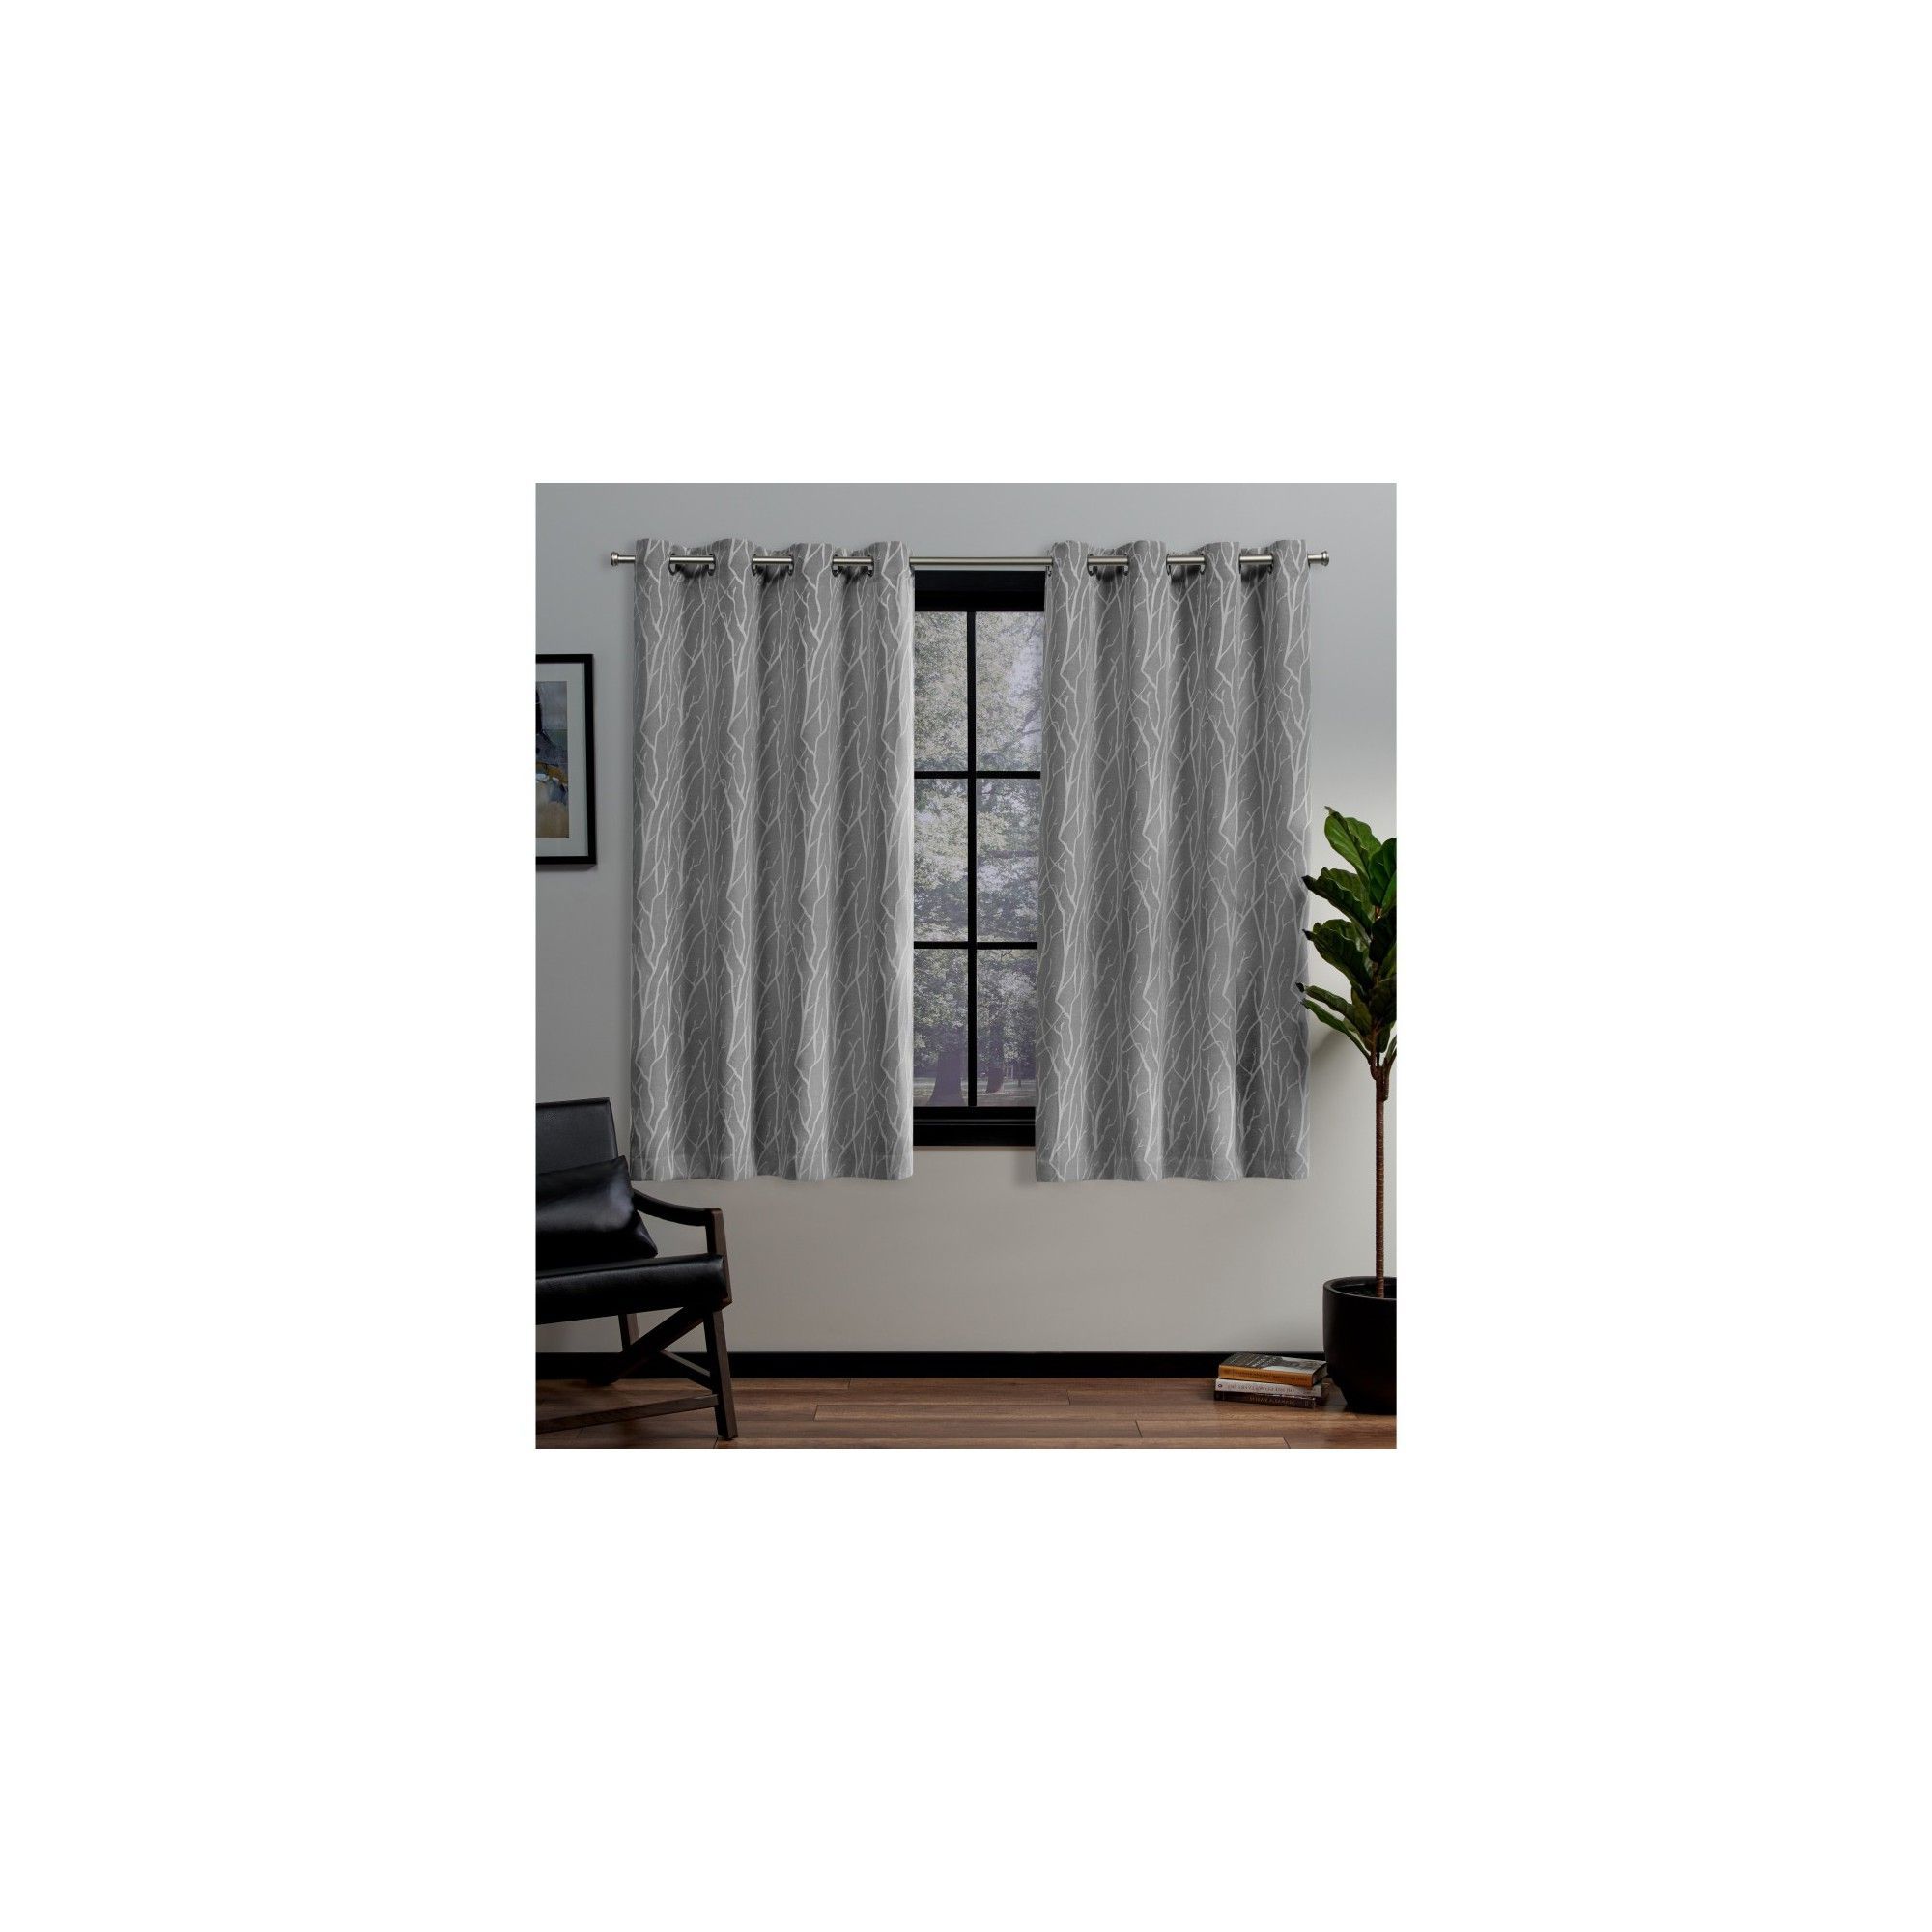 Most Popular Forest Hill Woven Blackout Grommet Top Curtain Panel Pairs Inside 52"x63" Forest Hill Woven Blackout Grommet Top Window (View 19 of 20)